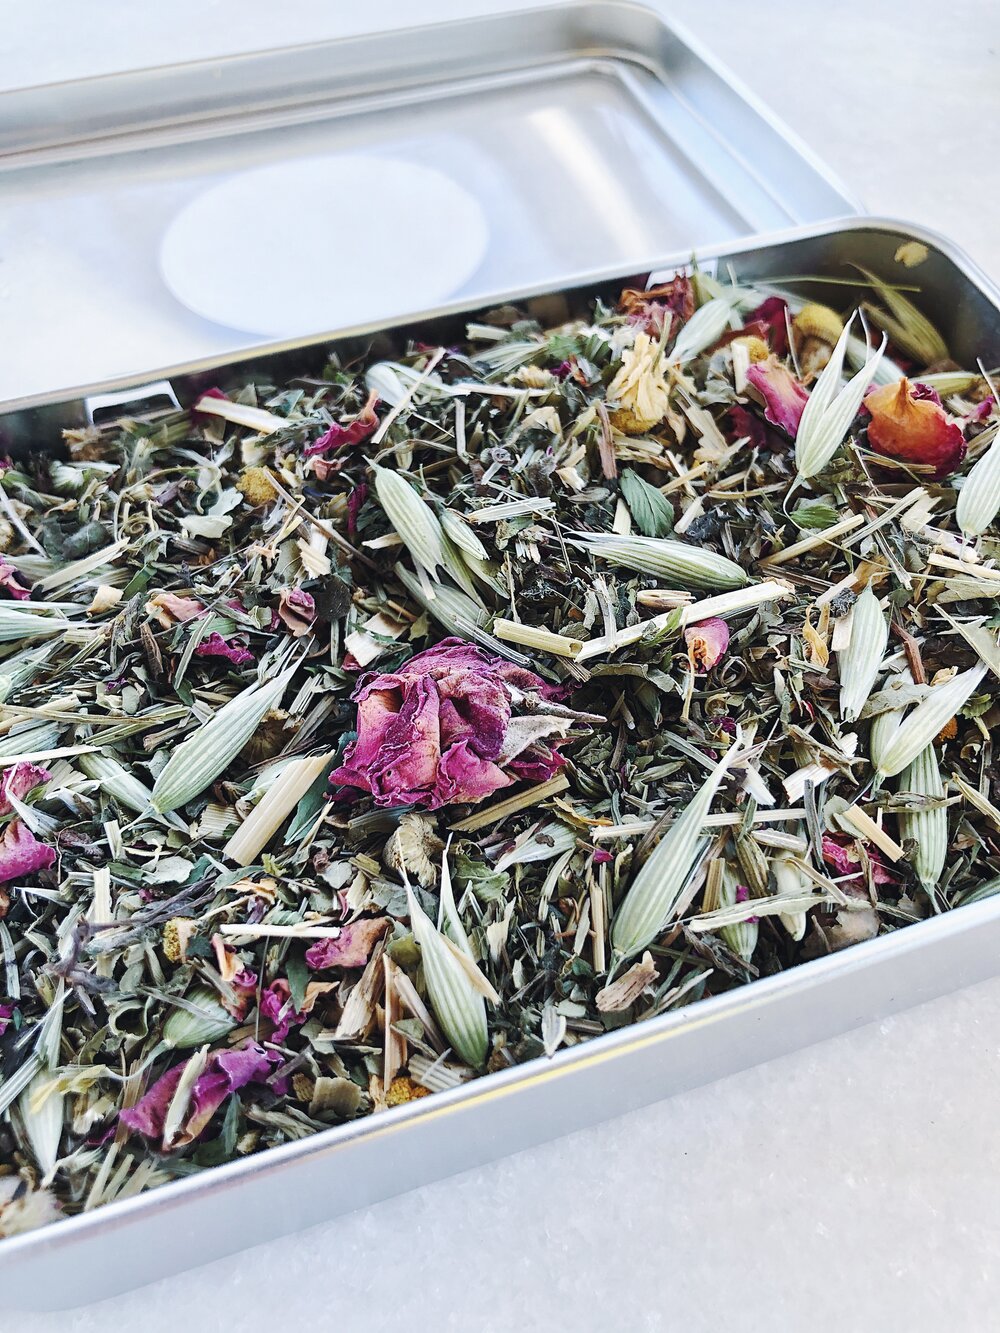 Dried herbs and flowers prepared on a tray for Flora Wellness “Relax Mom Tea“  photo credit Flora Wellness